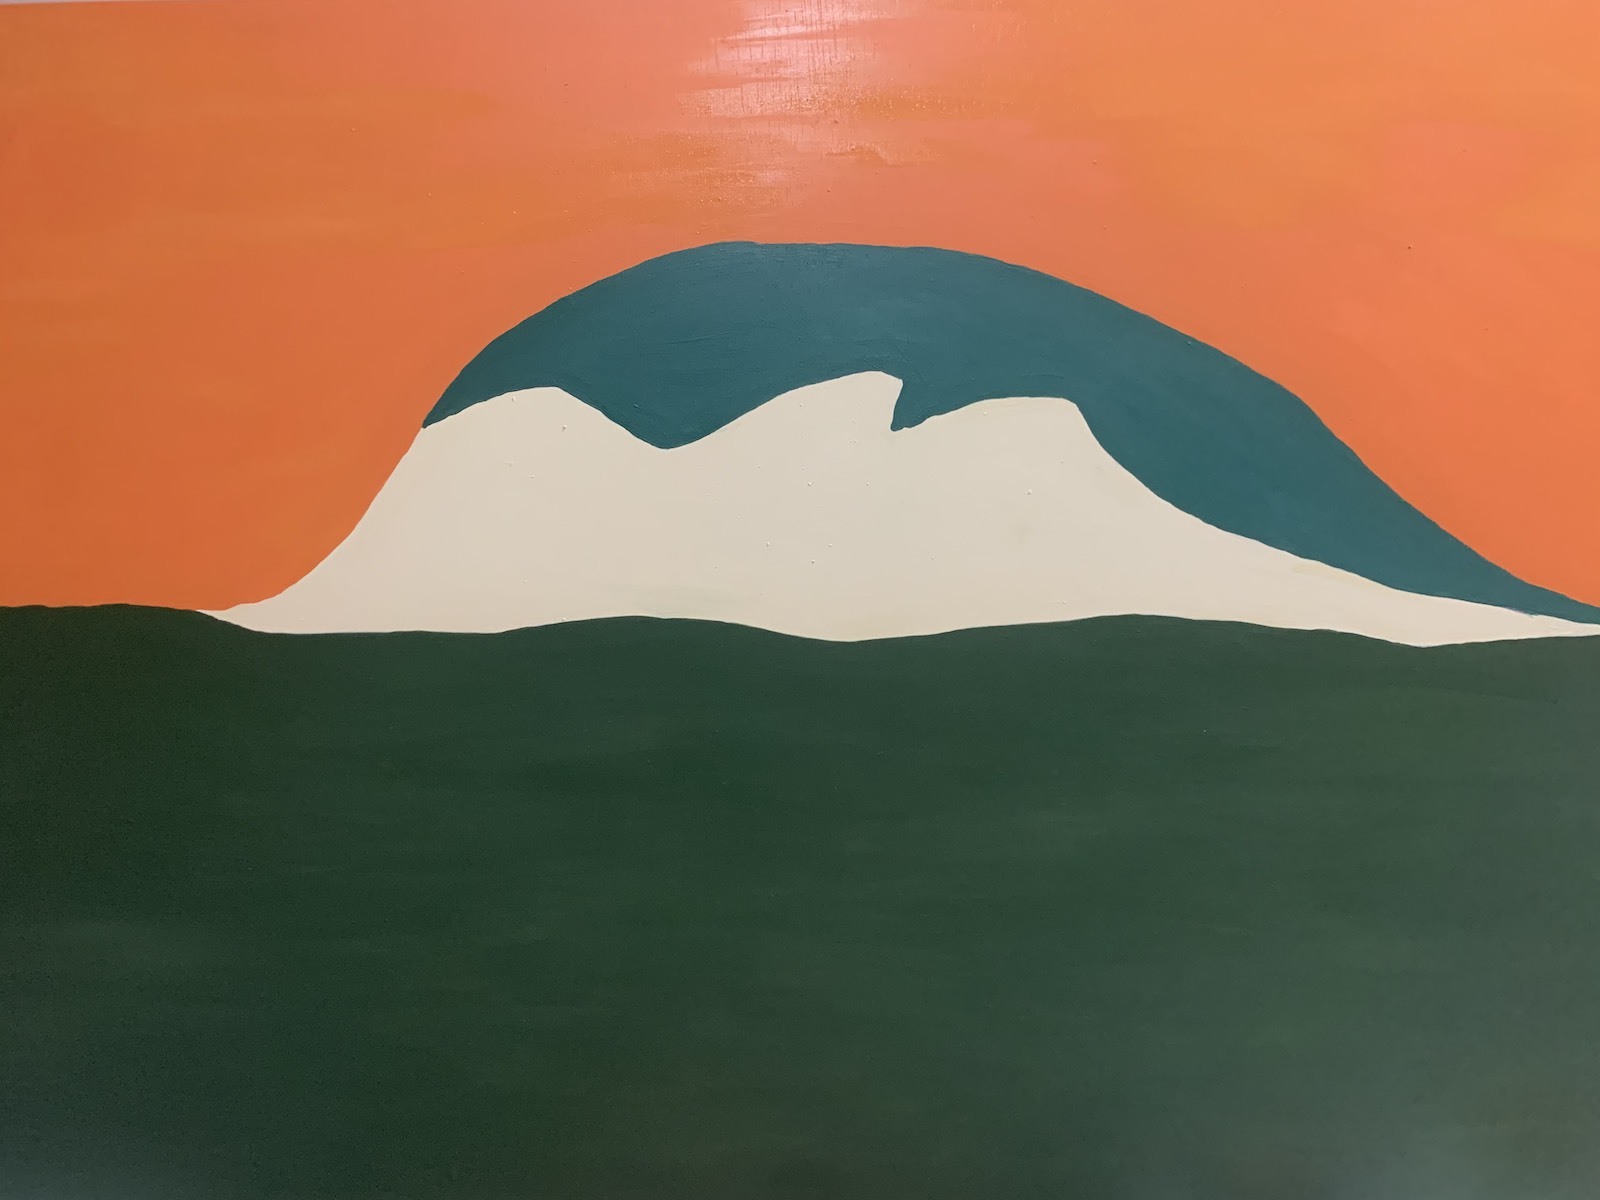 A simple mountain rises out of a green landscape against a bright orange sky